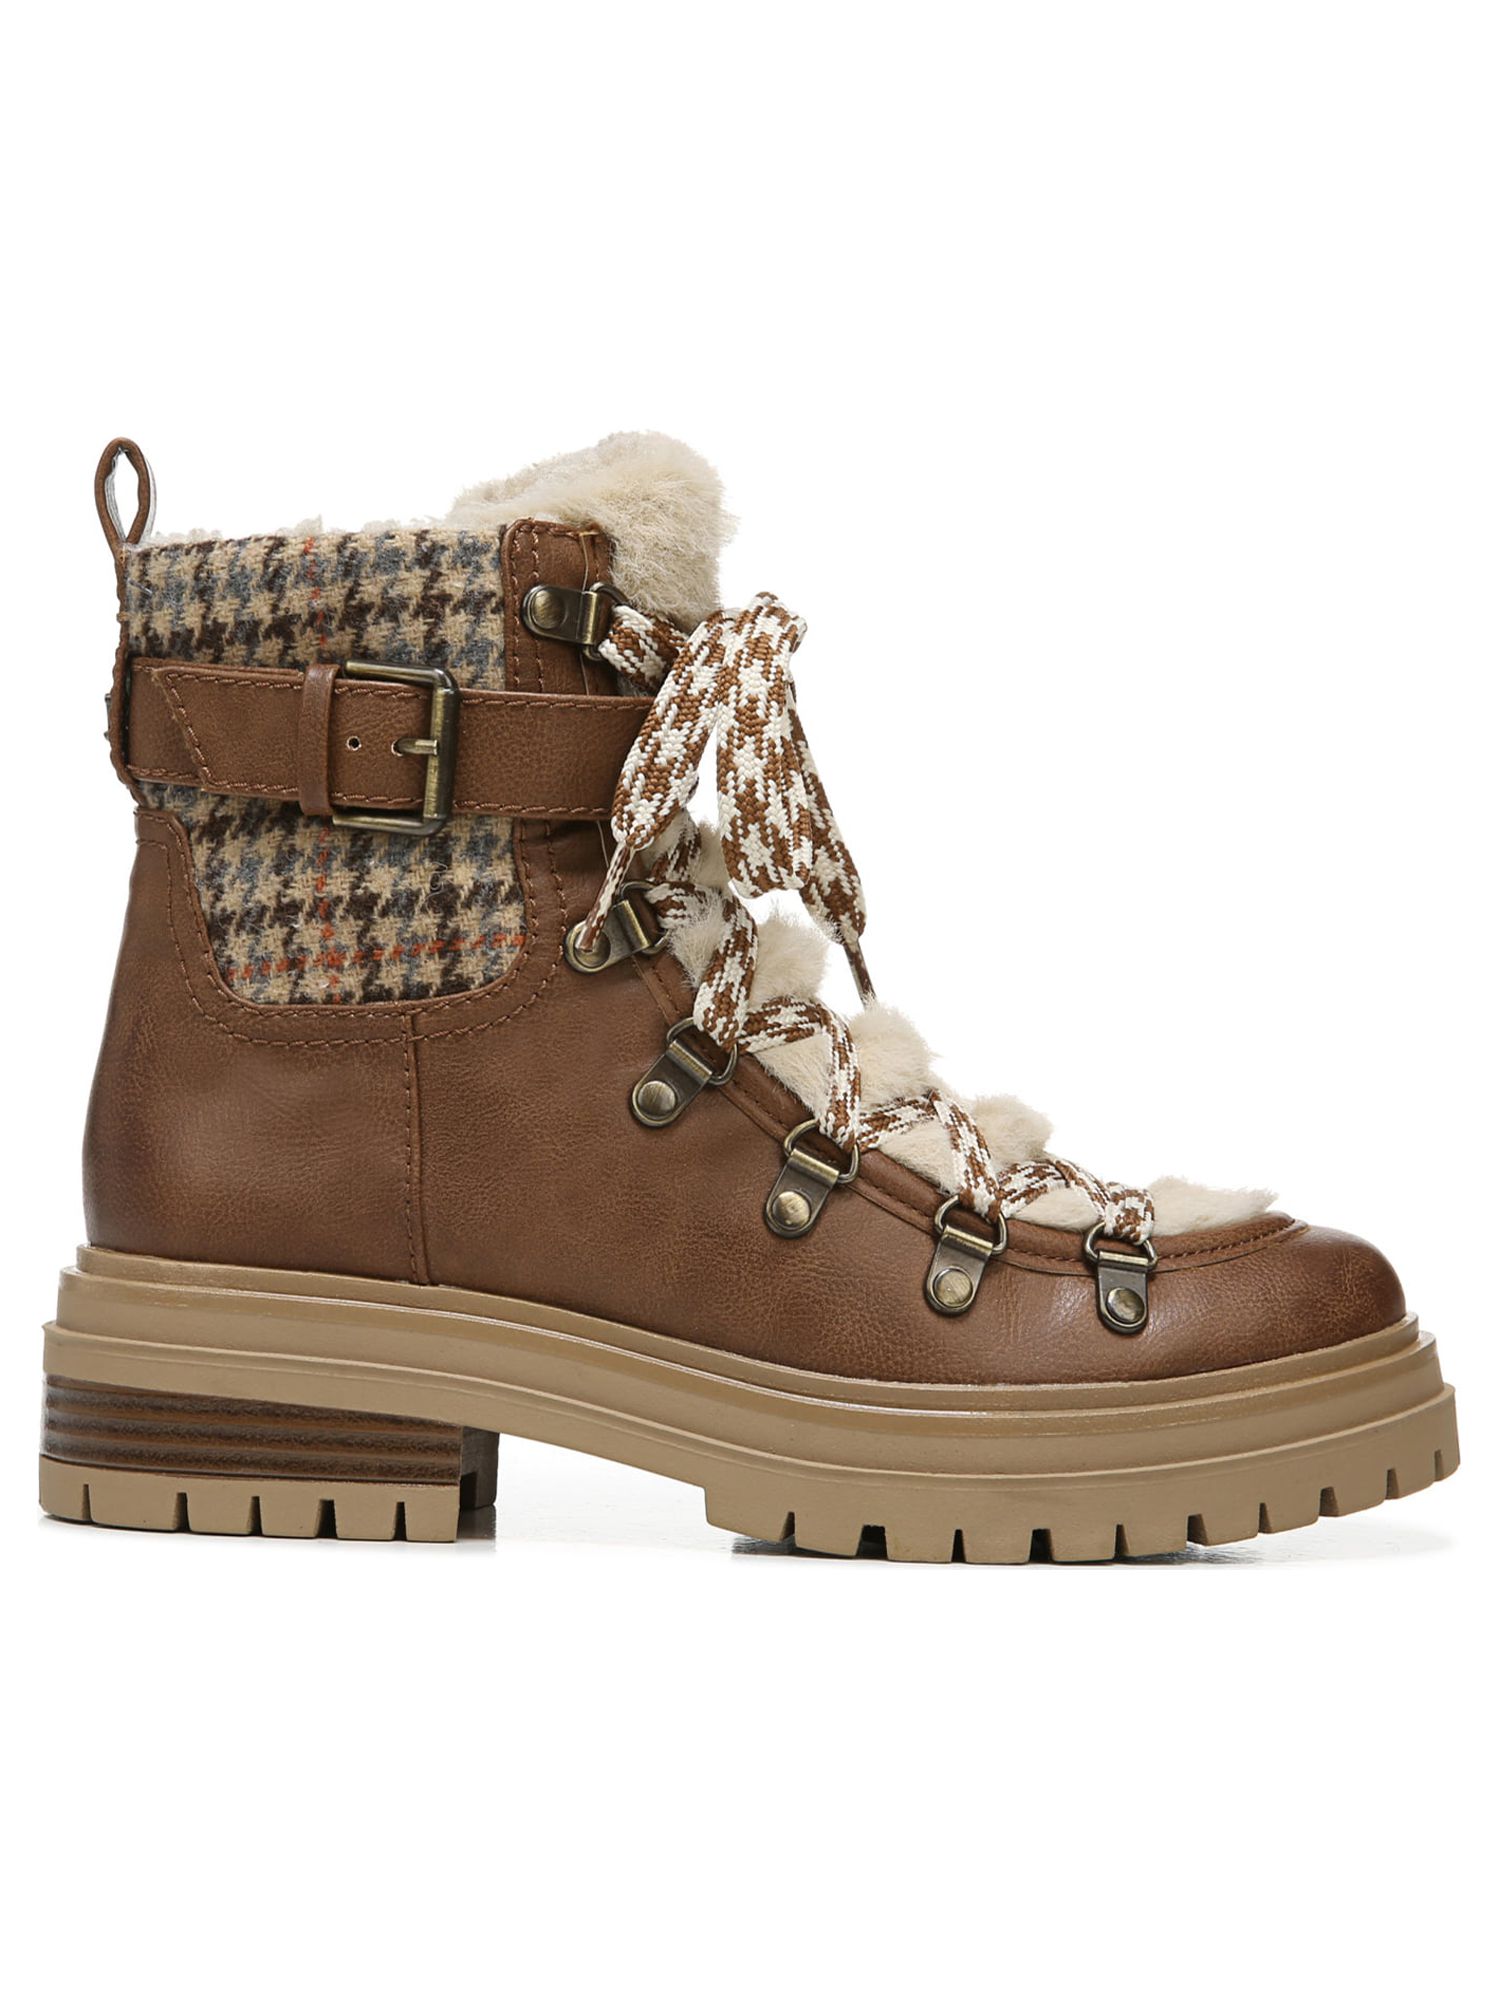 Circus by Sam Edelman Women's Gretchen Shearling Hiker Boot - image 5 of 5